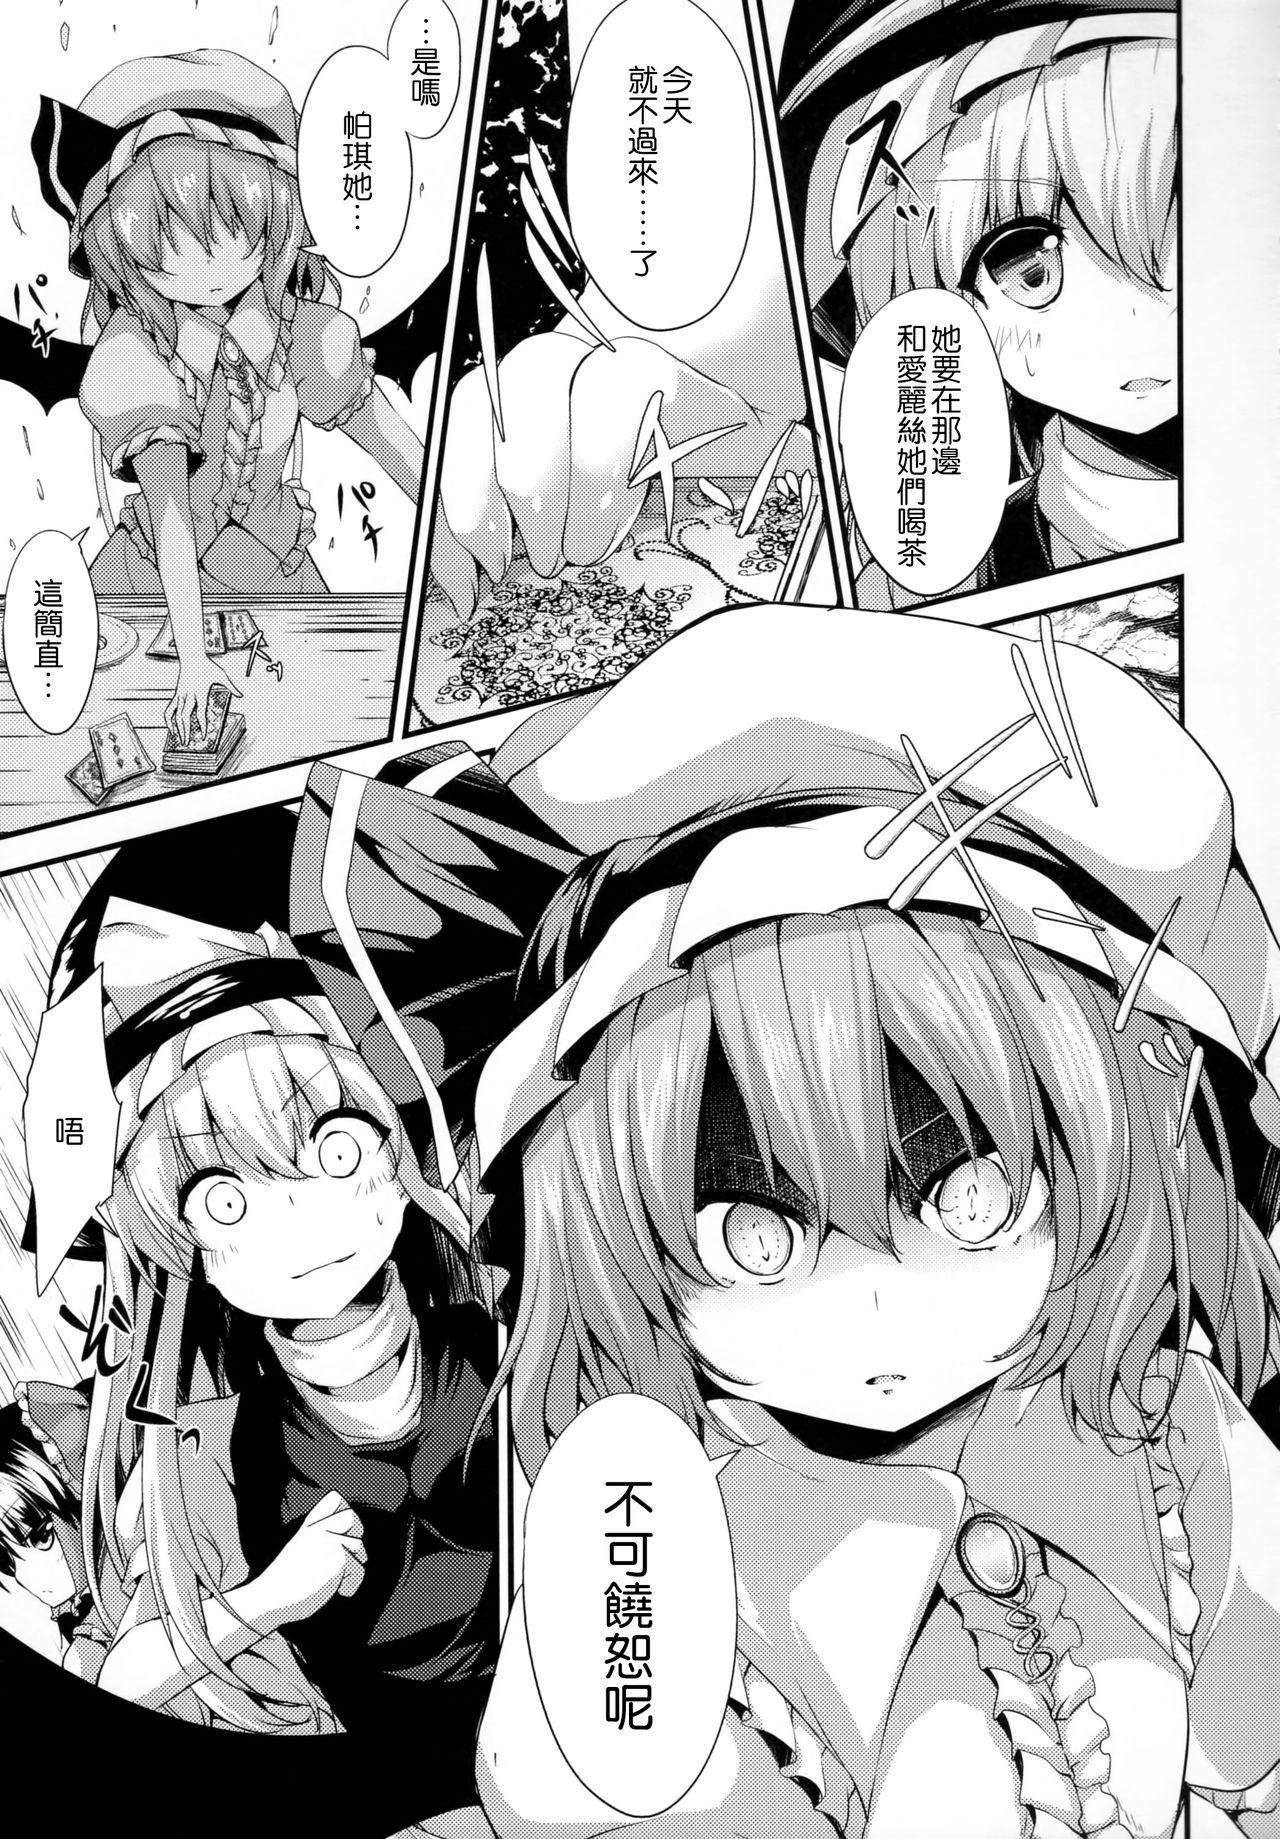 Ride Satanic Carnival a bad dream - Touhou project Weird - Page 7